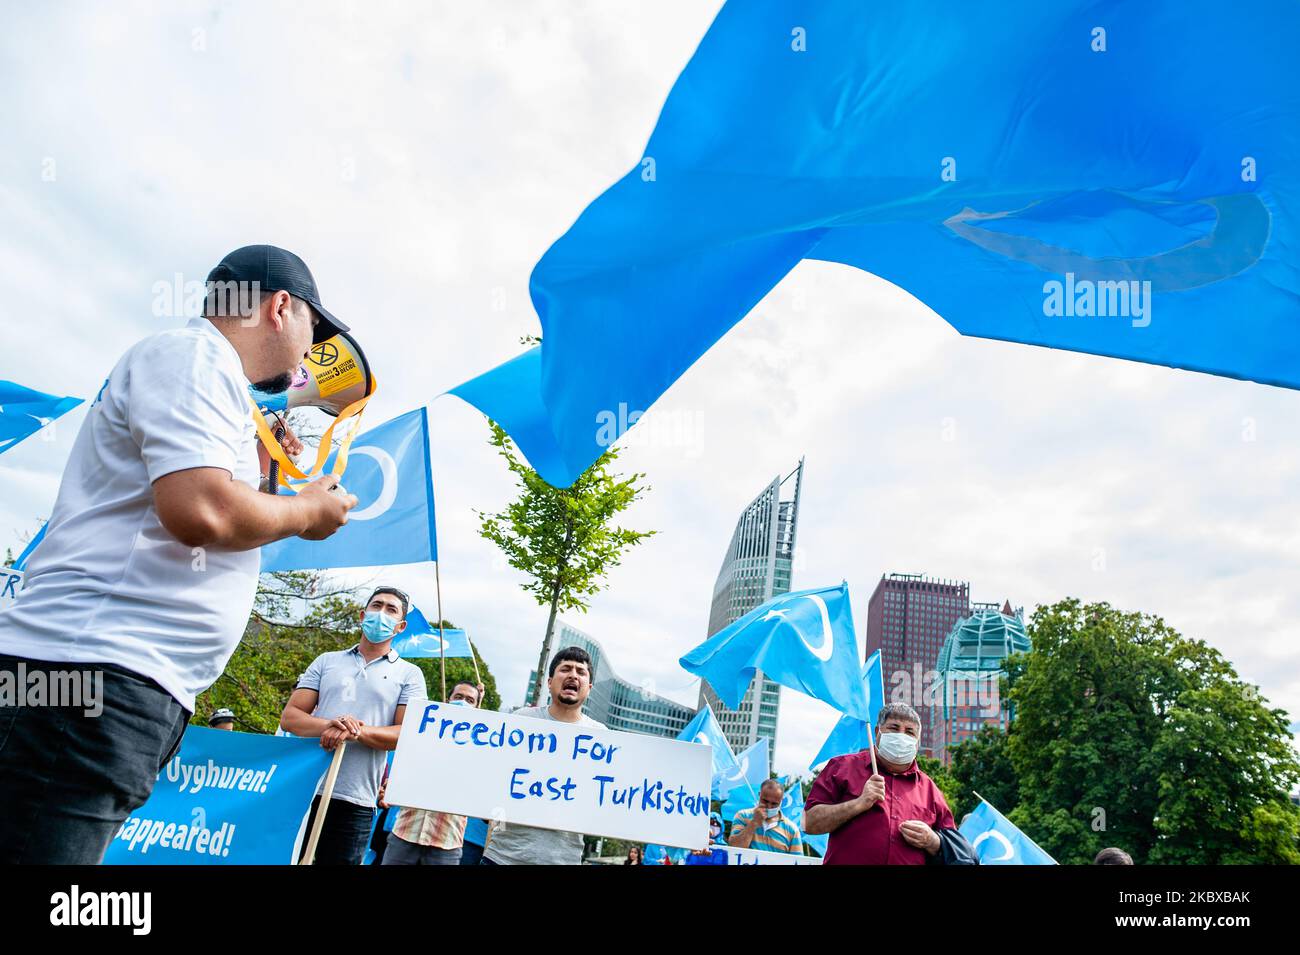 A group of Uyghurs are holding placards, and Uyghur flags, during the demonstration 'Freedom for Uyghurs' in The Hague, Netherlands on August 20th, 2020. (Photo by Romy Arroyo Fernandez/NurPhoto) Stock Photo